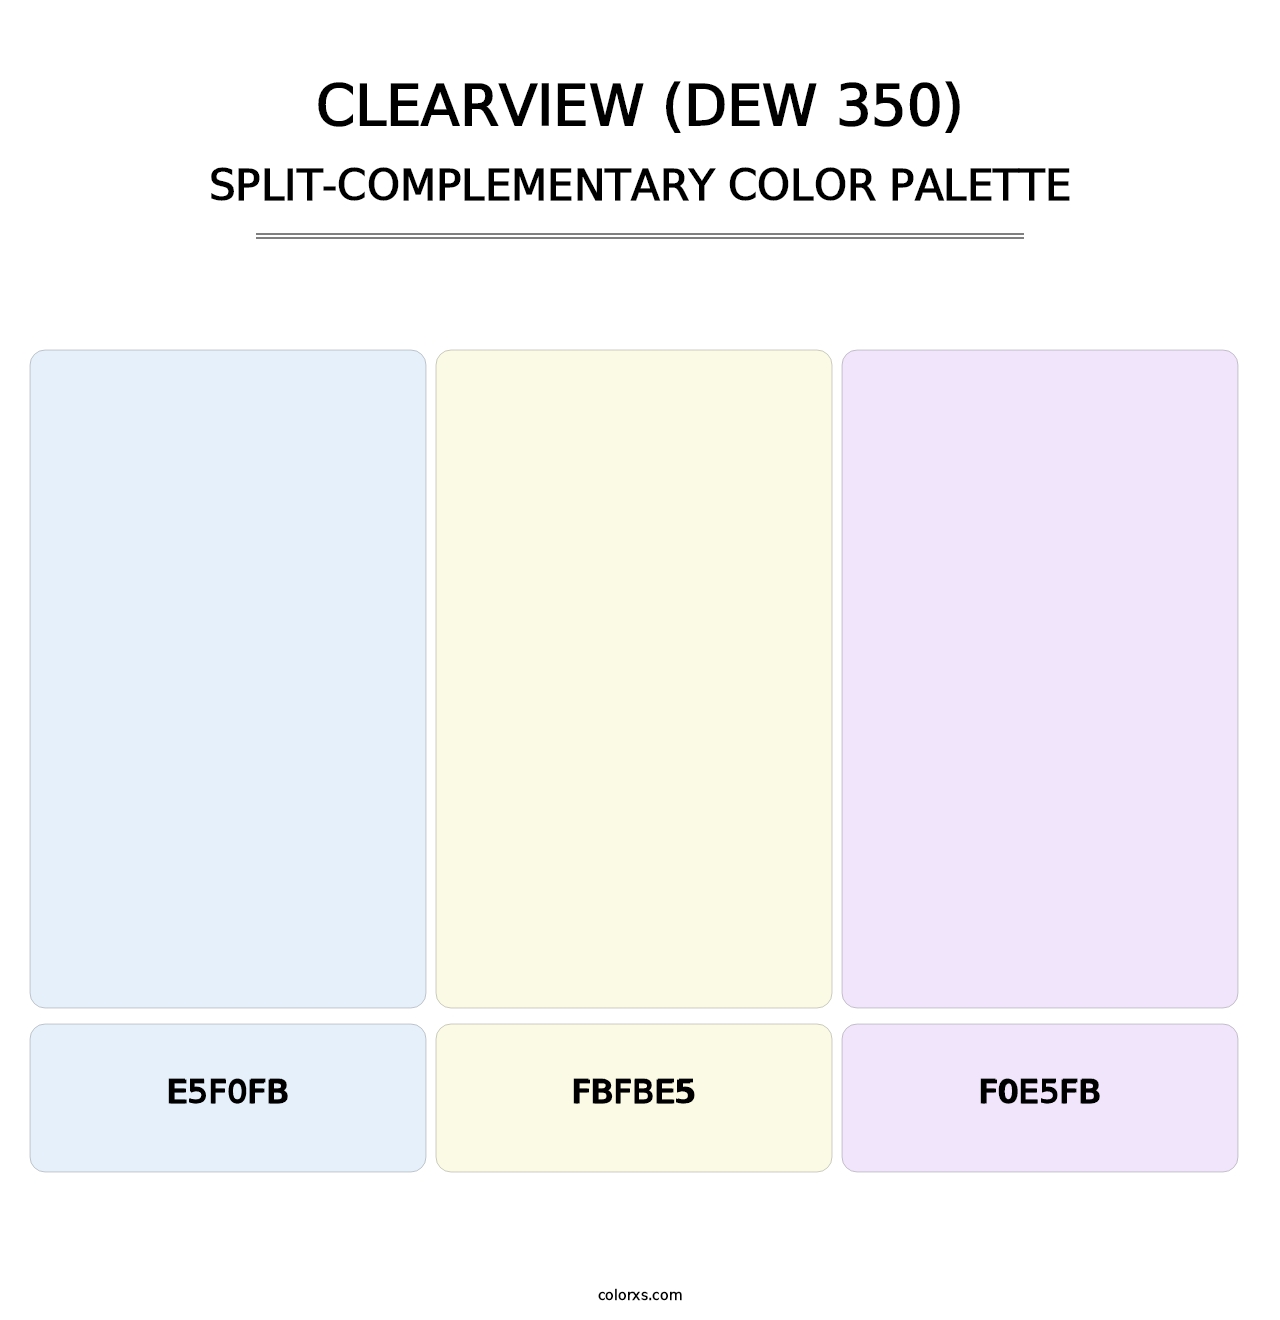 Clearview (DEW 350) - Split-Complementary Color Palette